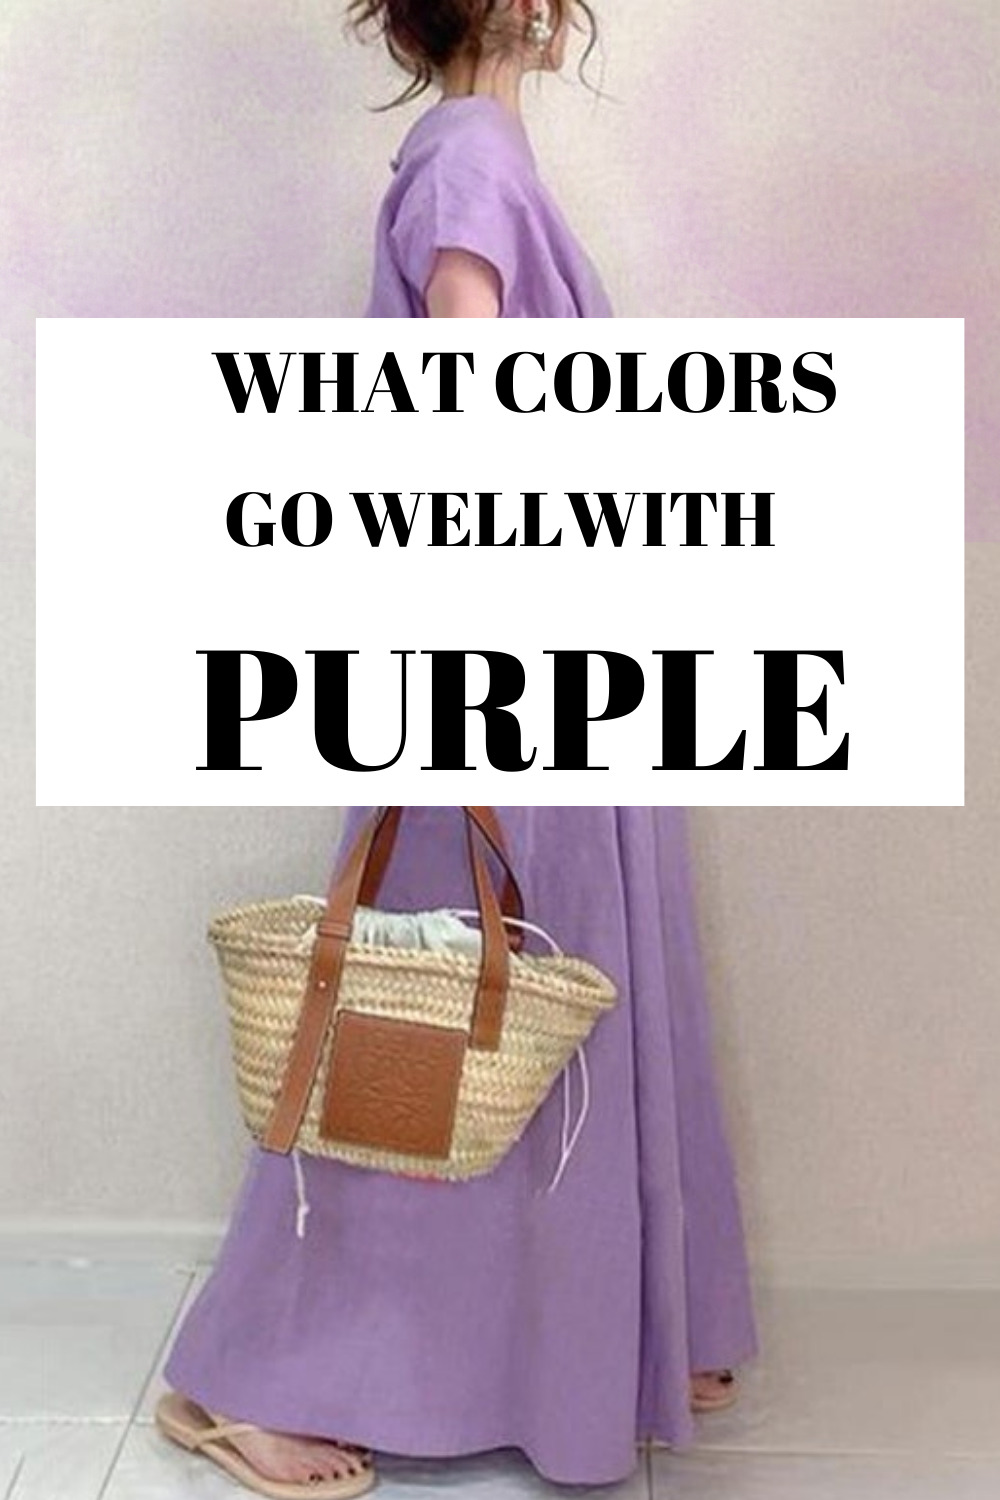 What Colors Go Well With Purple